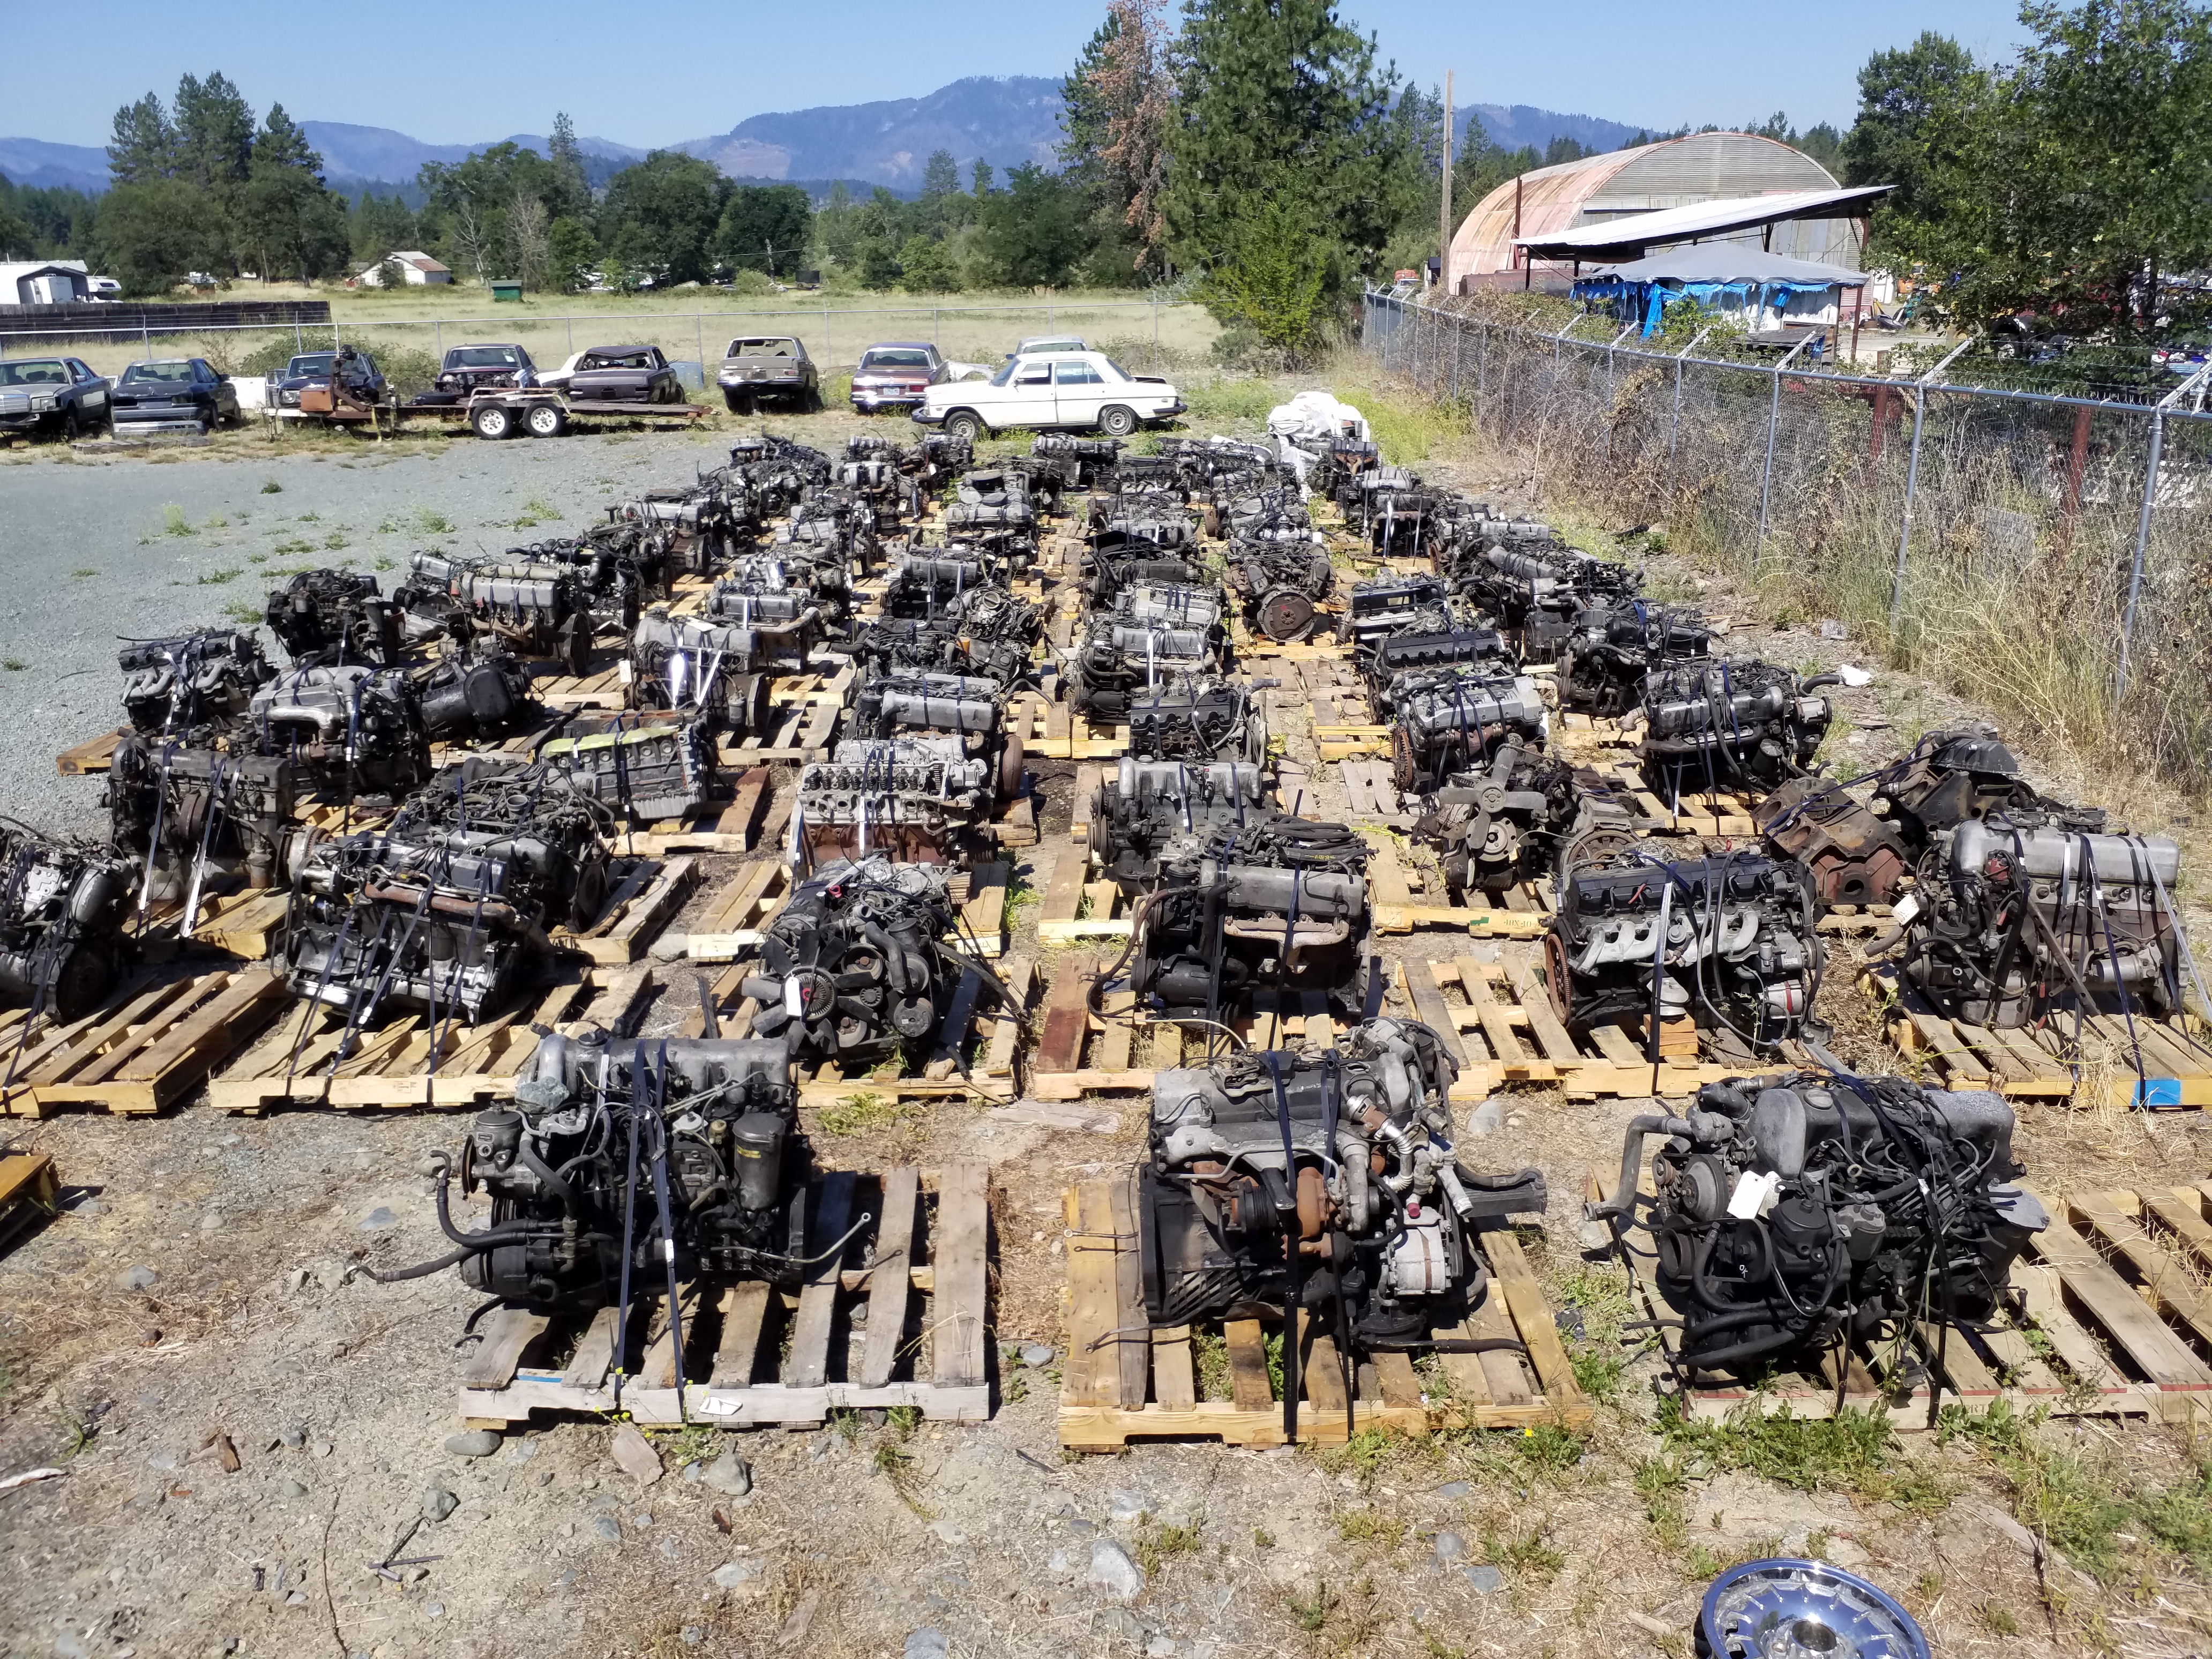 Used Classic Mercedes Engine Collection